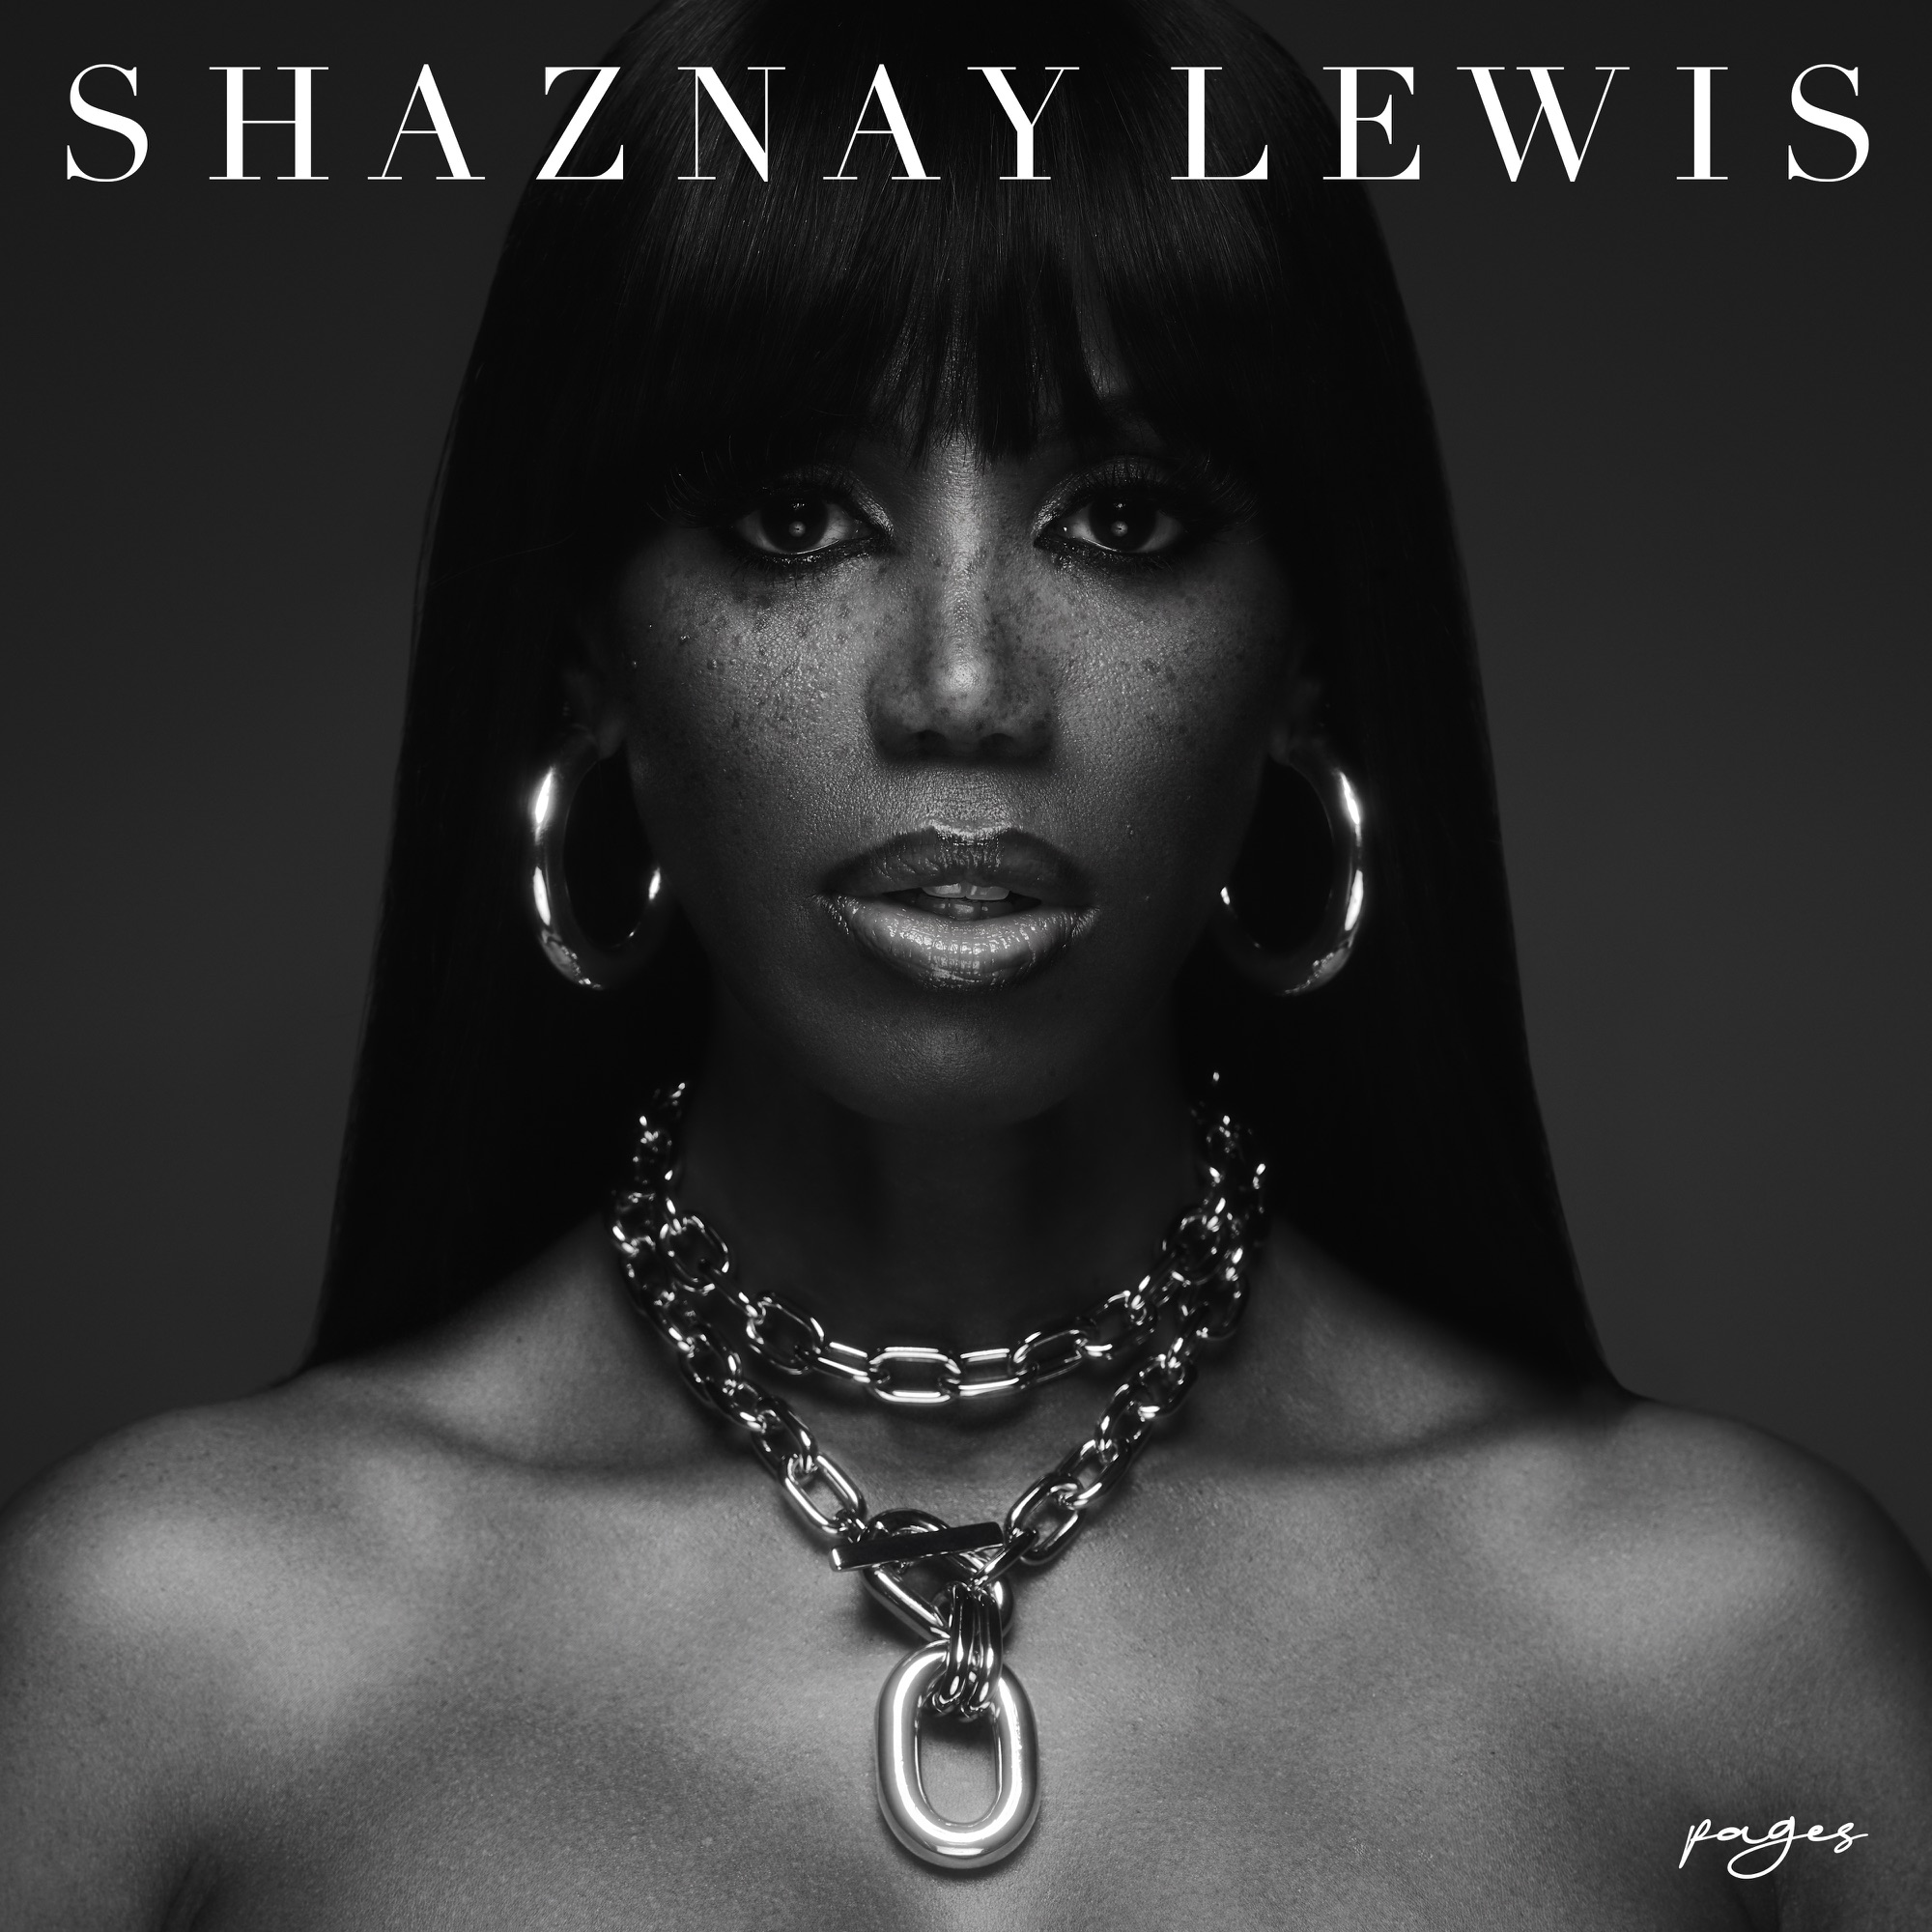 Shaznay Lewis Pages cover artwork